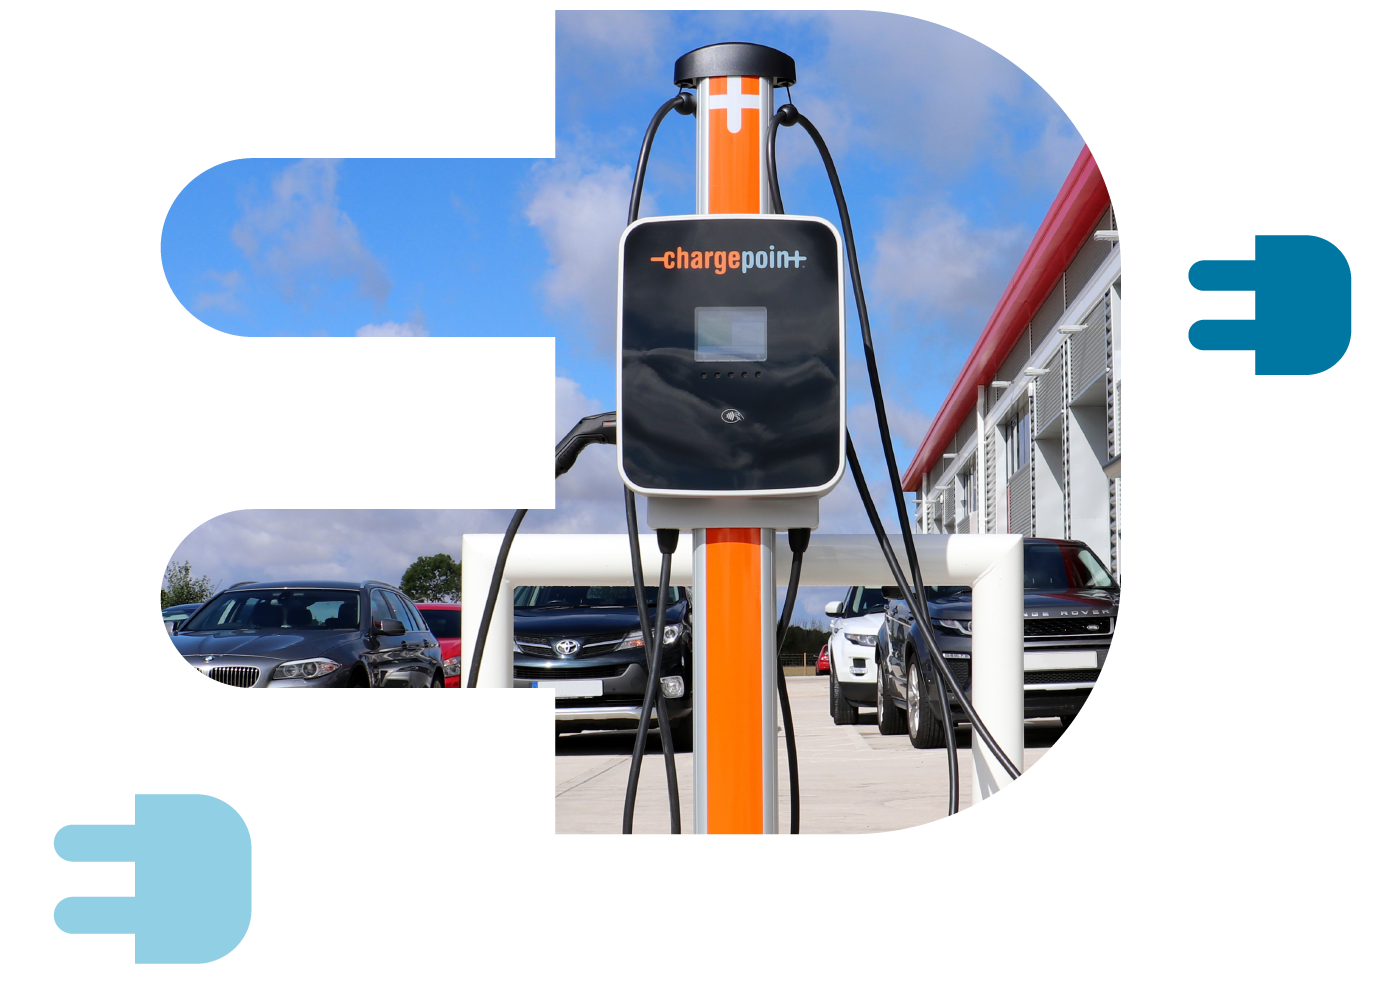 The leading EV charging platform for the automotive industry